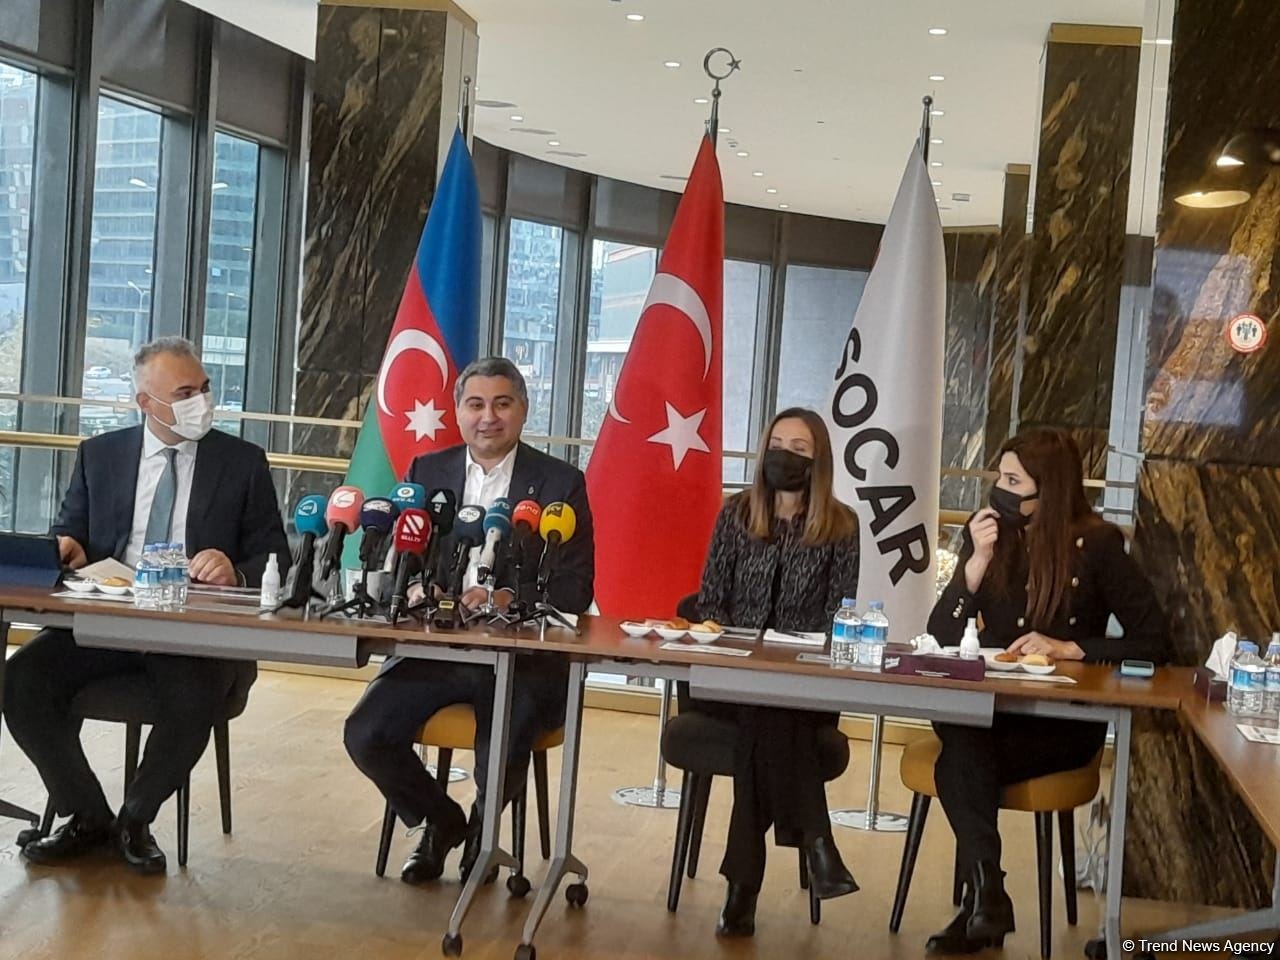 SOCAR Turkey discloses its investments in Turkey